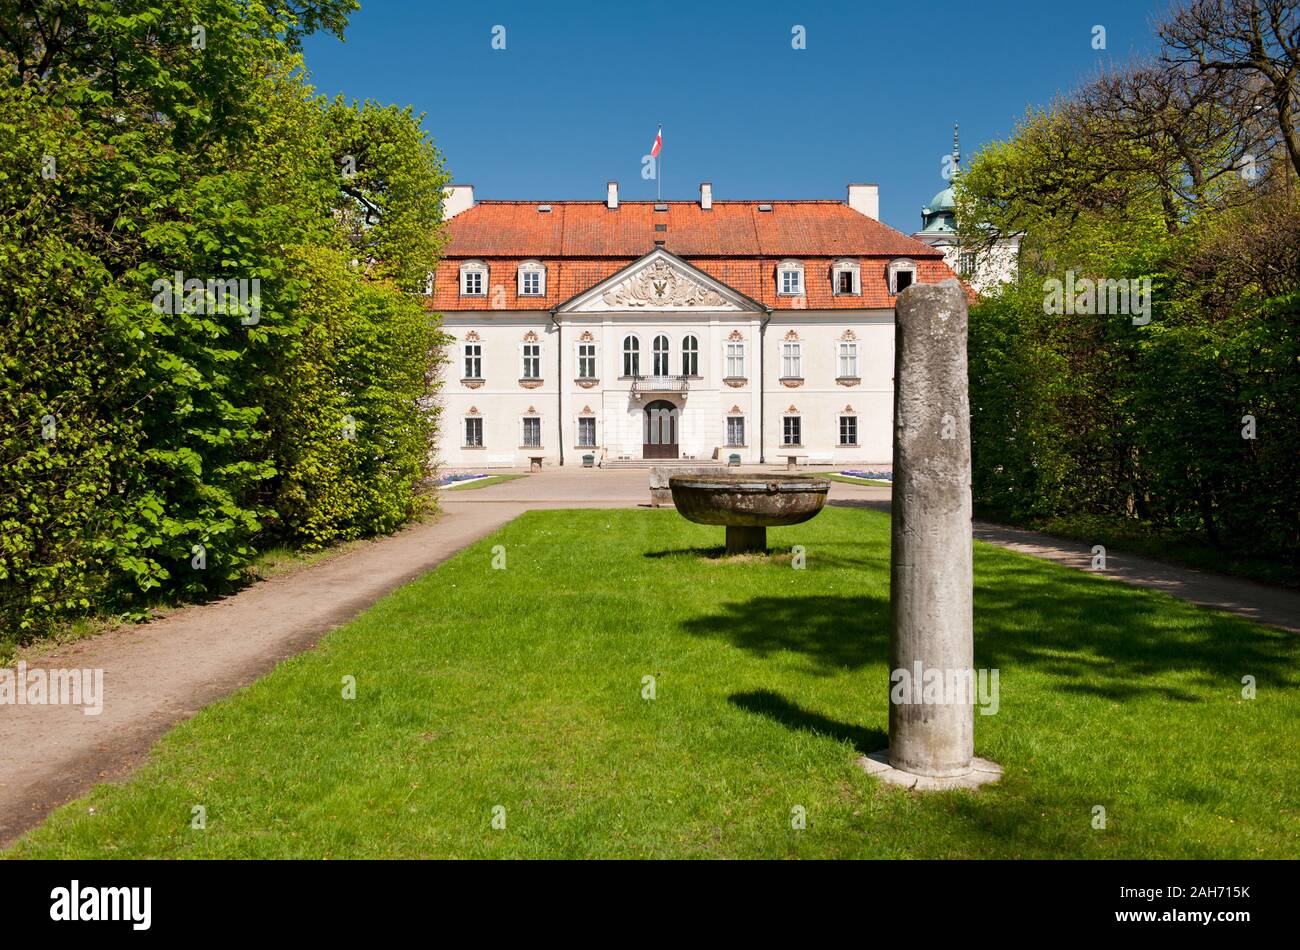 Column in the baroque garden in Nieborów in Poland, Europe, Radziwiłł's Palace across the wide alley view with monuments in ornamental garden. Stock Photo